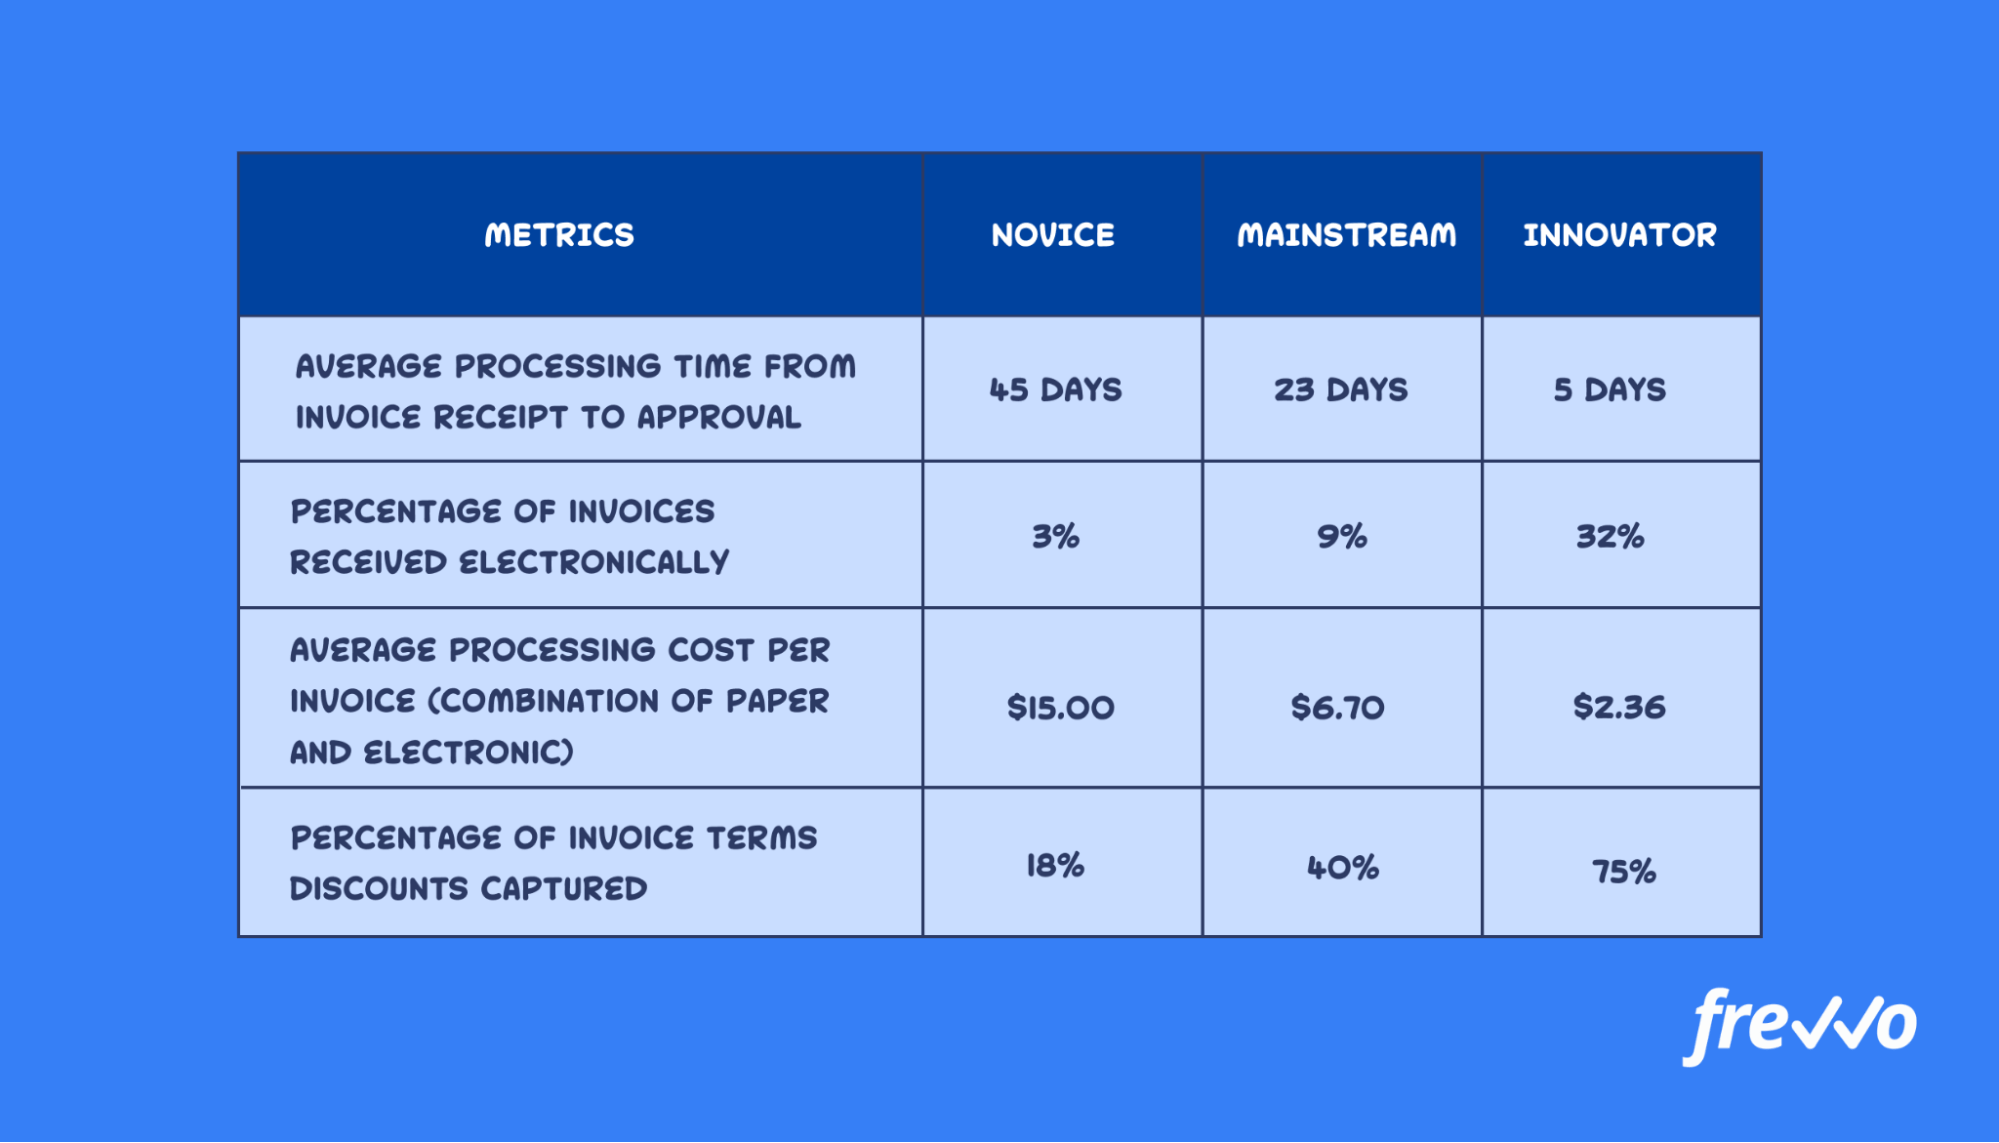 Invoice processing time and costs for different companies